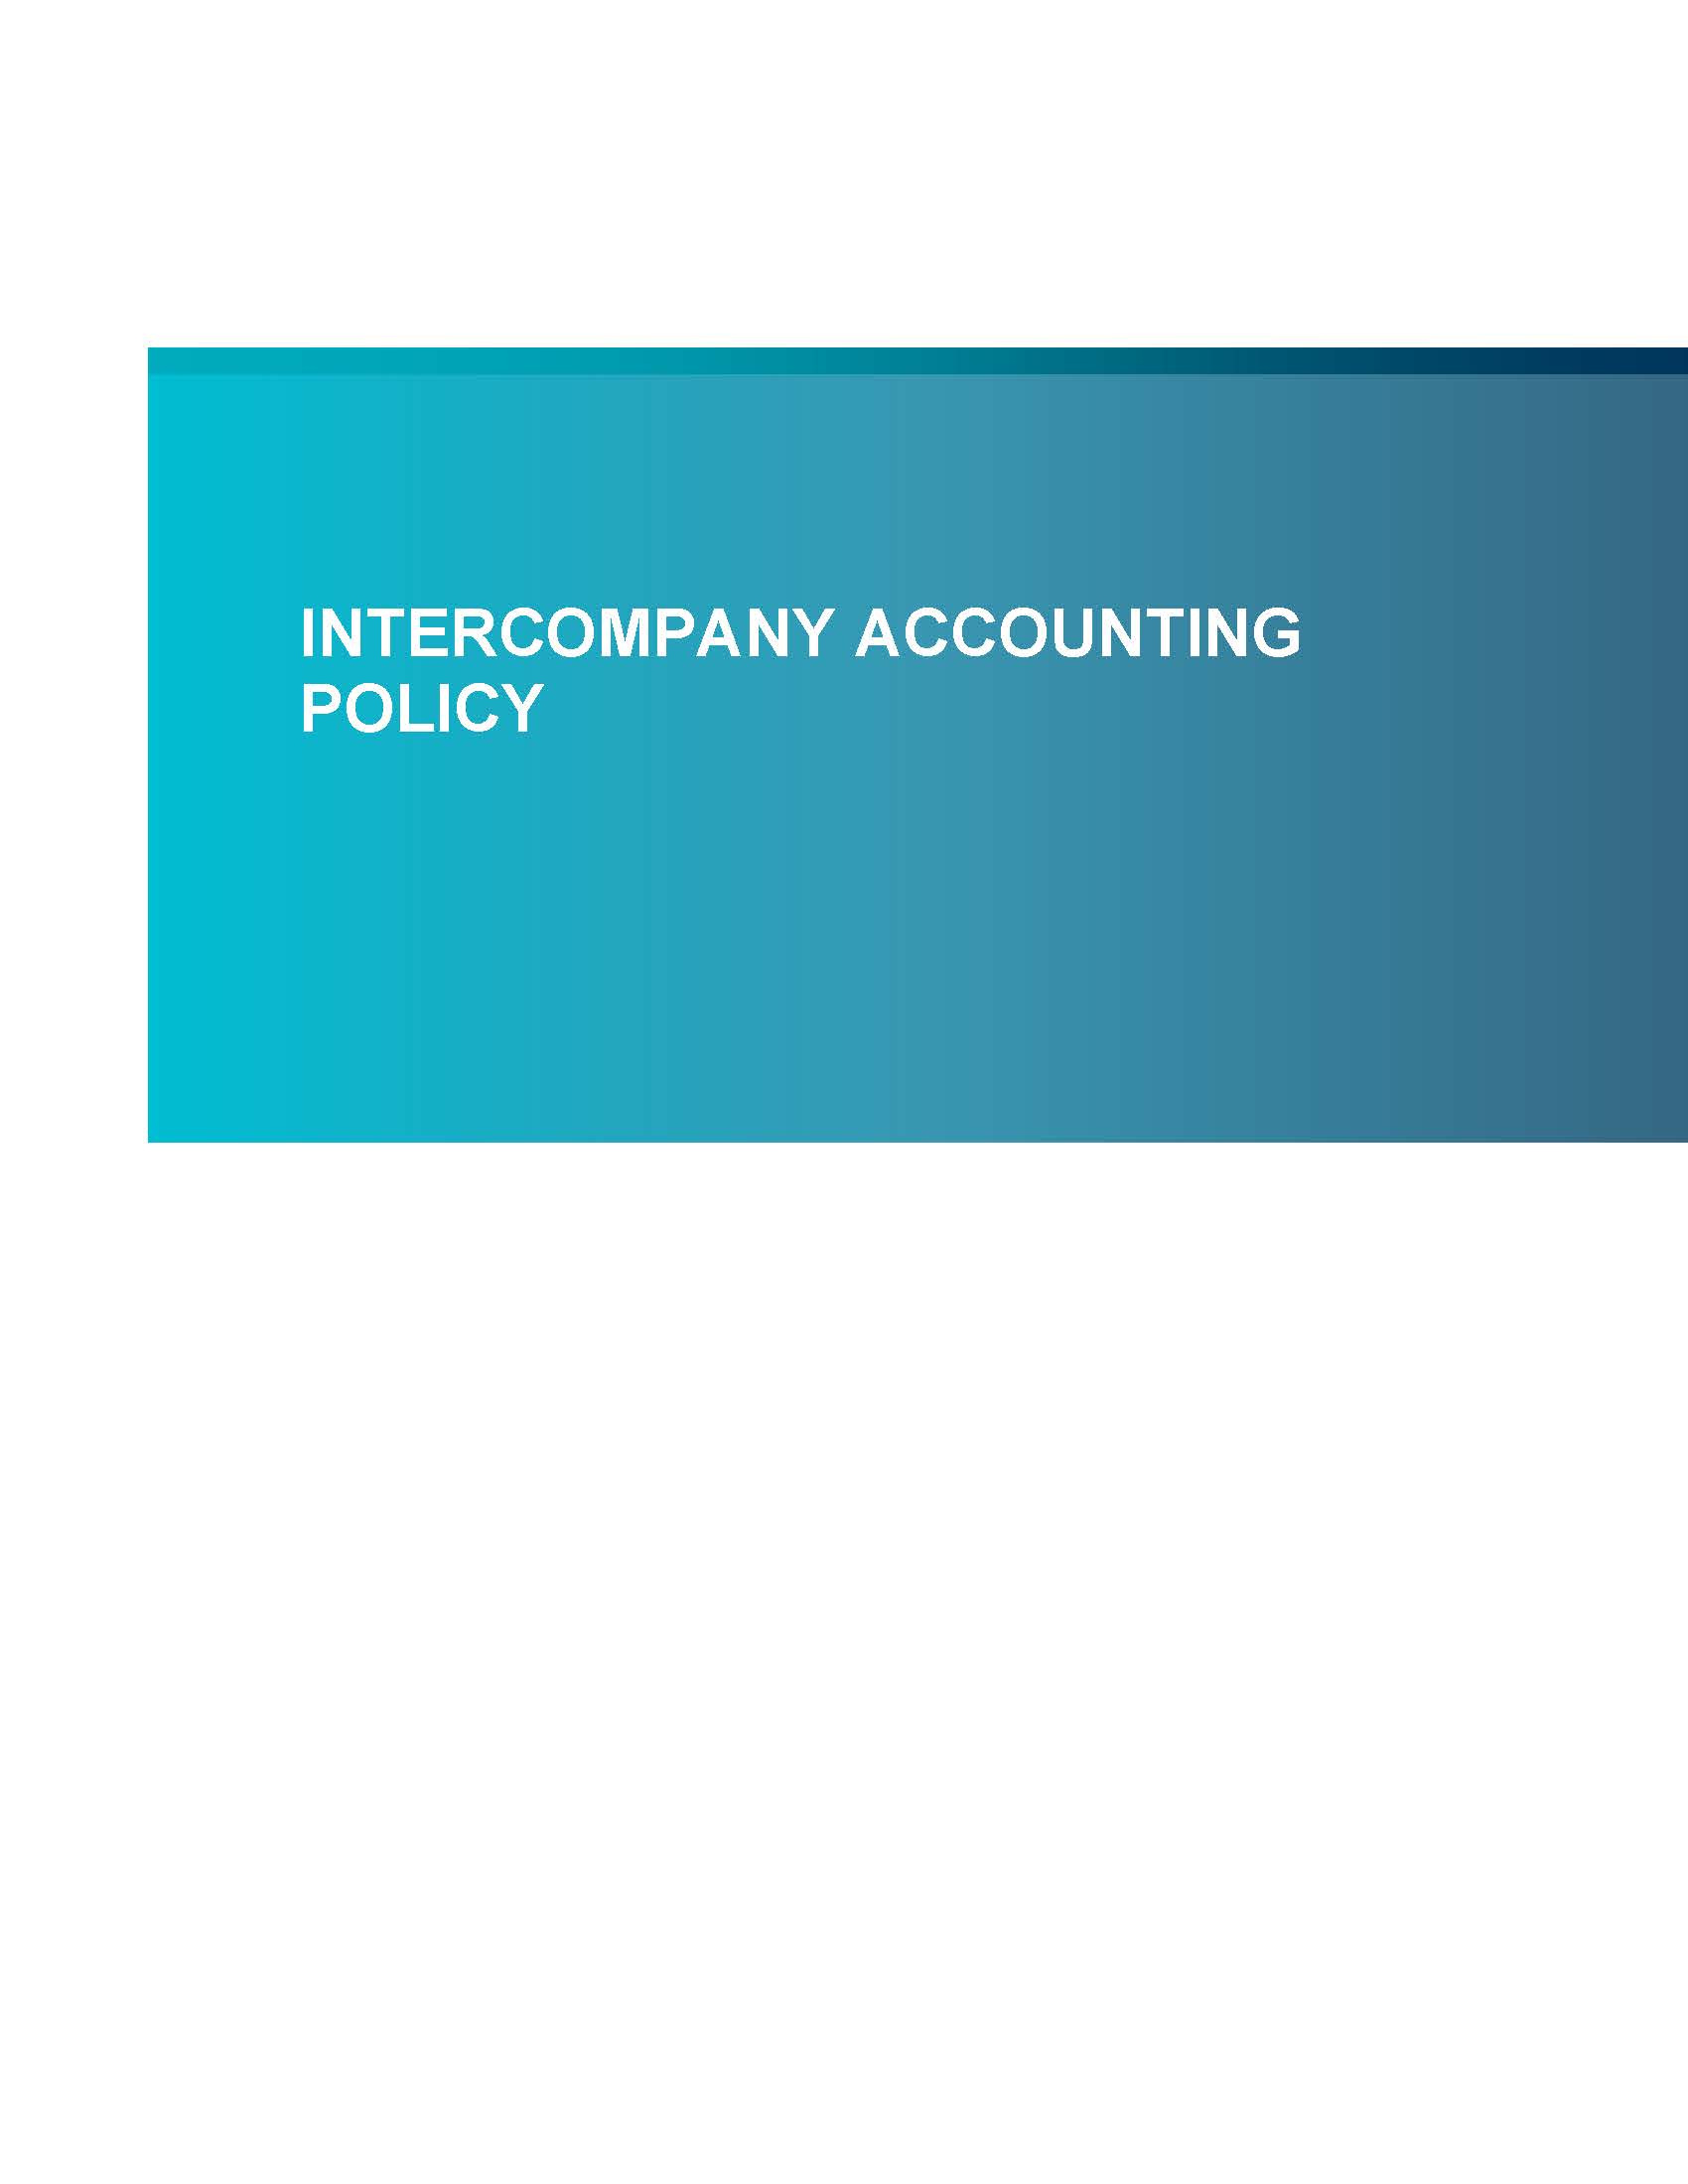 Screenshot of the first page of Intercompany Accounting Policy